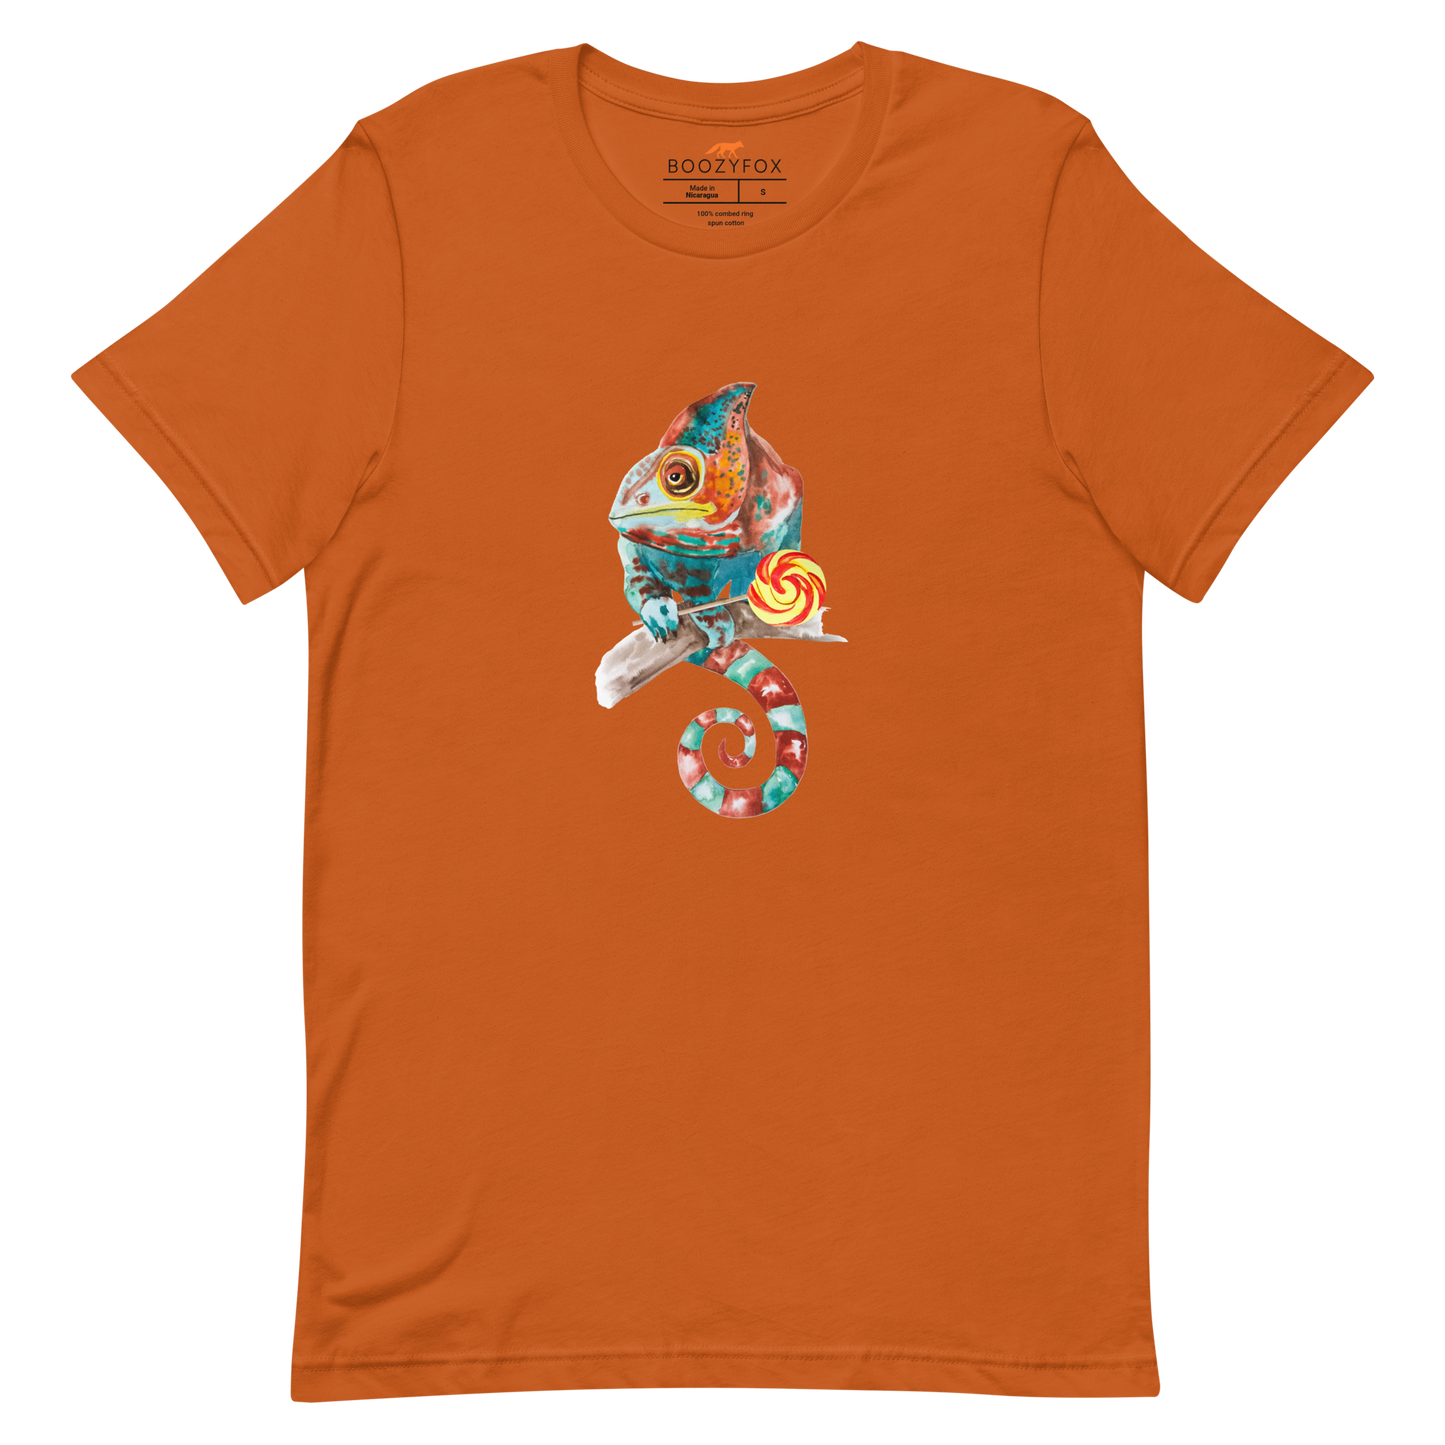 Autumn Colored Premium Chameleon T-Shirt featuring a charming Chameleon With A Lollipop graphic on the chest - Cool Graphic Chameleon Tees - Boozy Fox